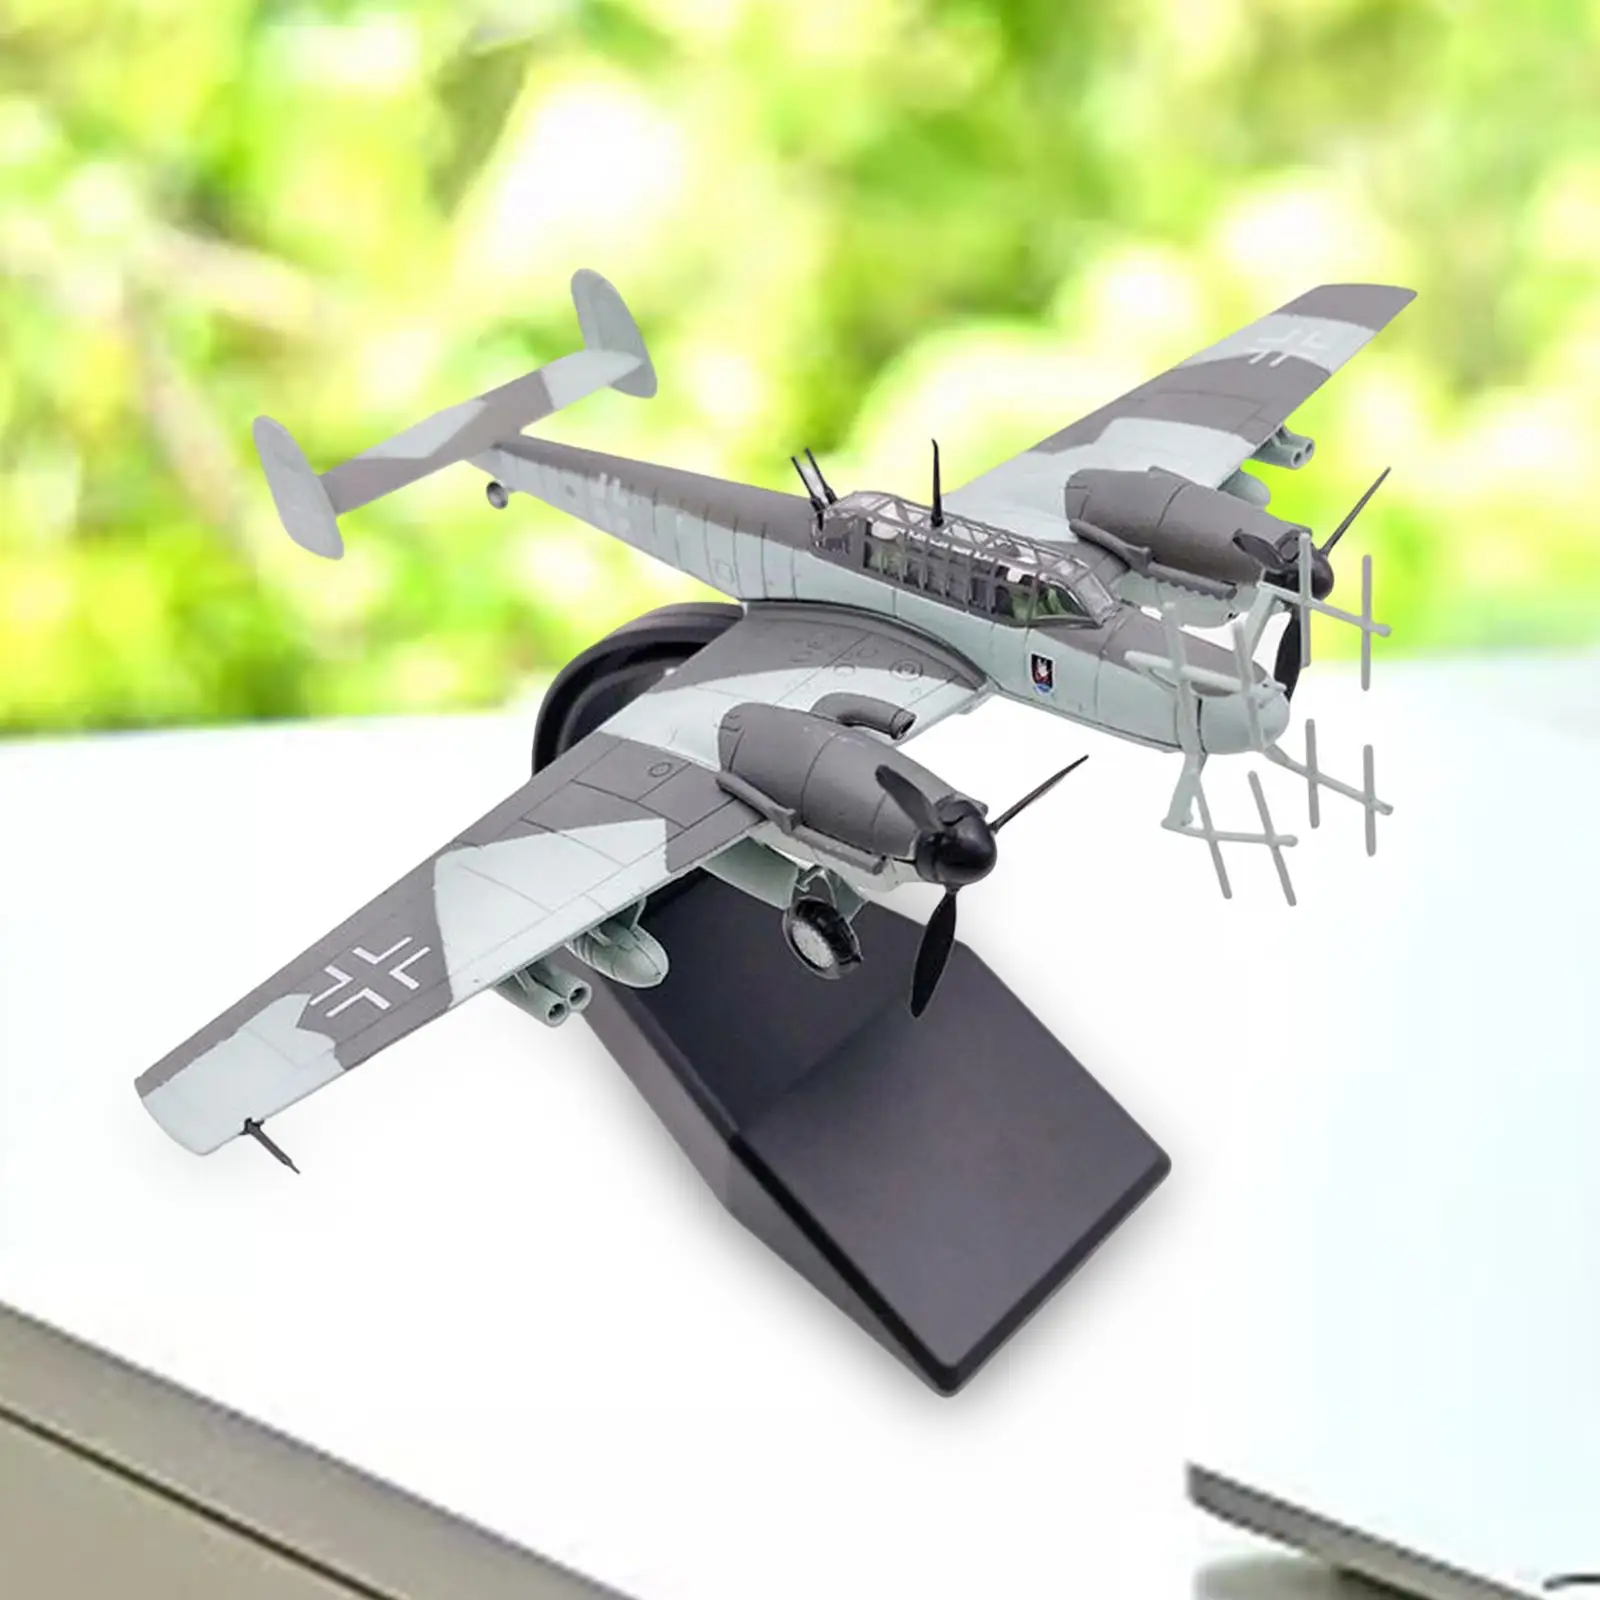 1:100 BF-110 Aircraft Model Desktop Table Household Decor Birthday Gifts